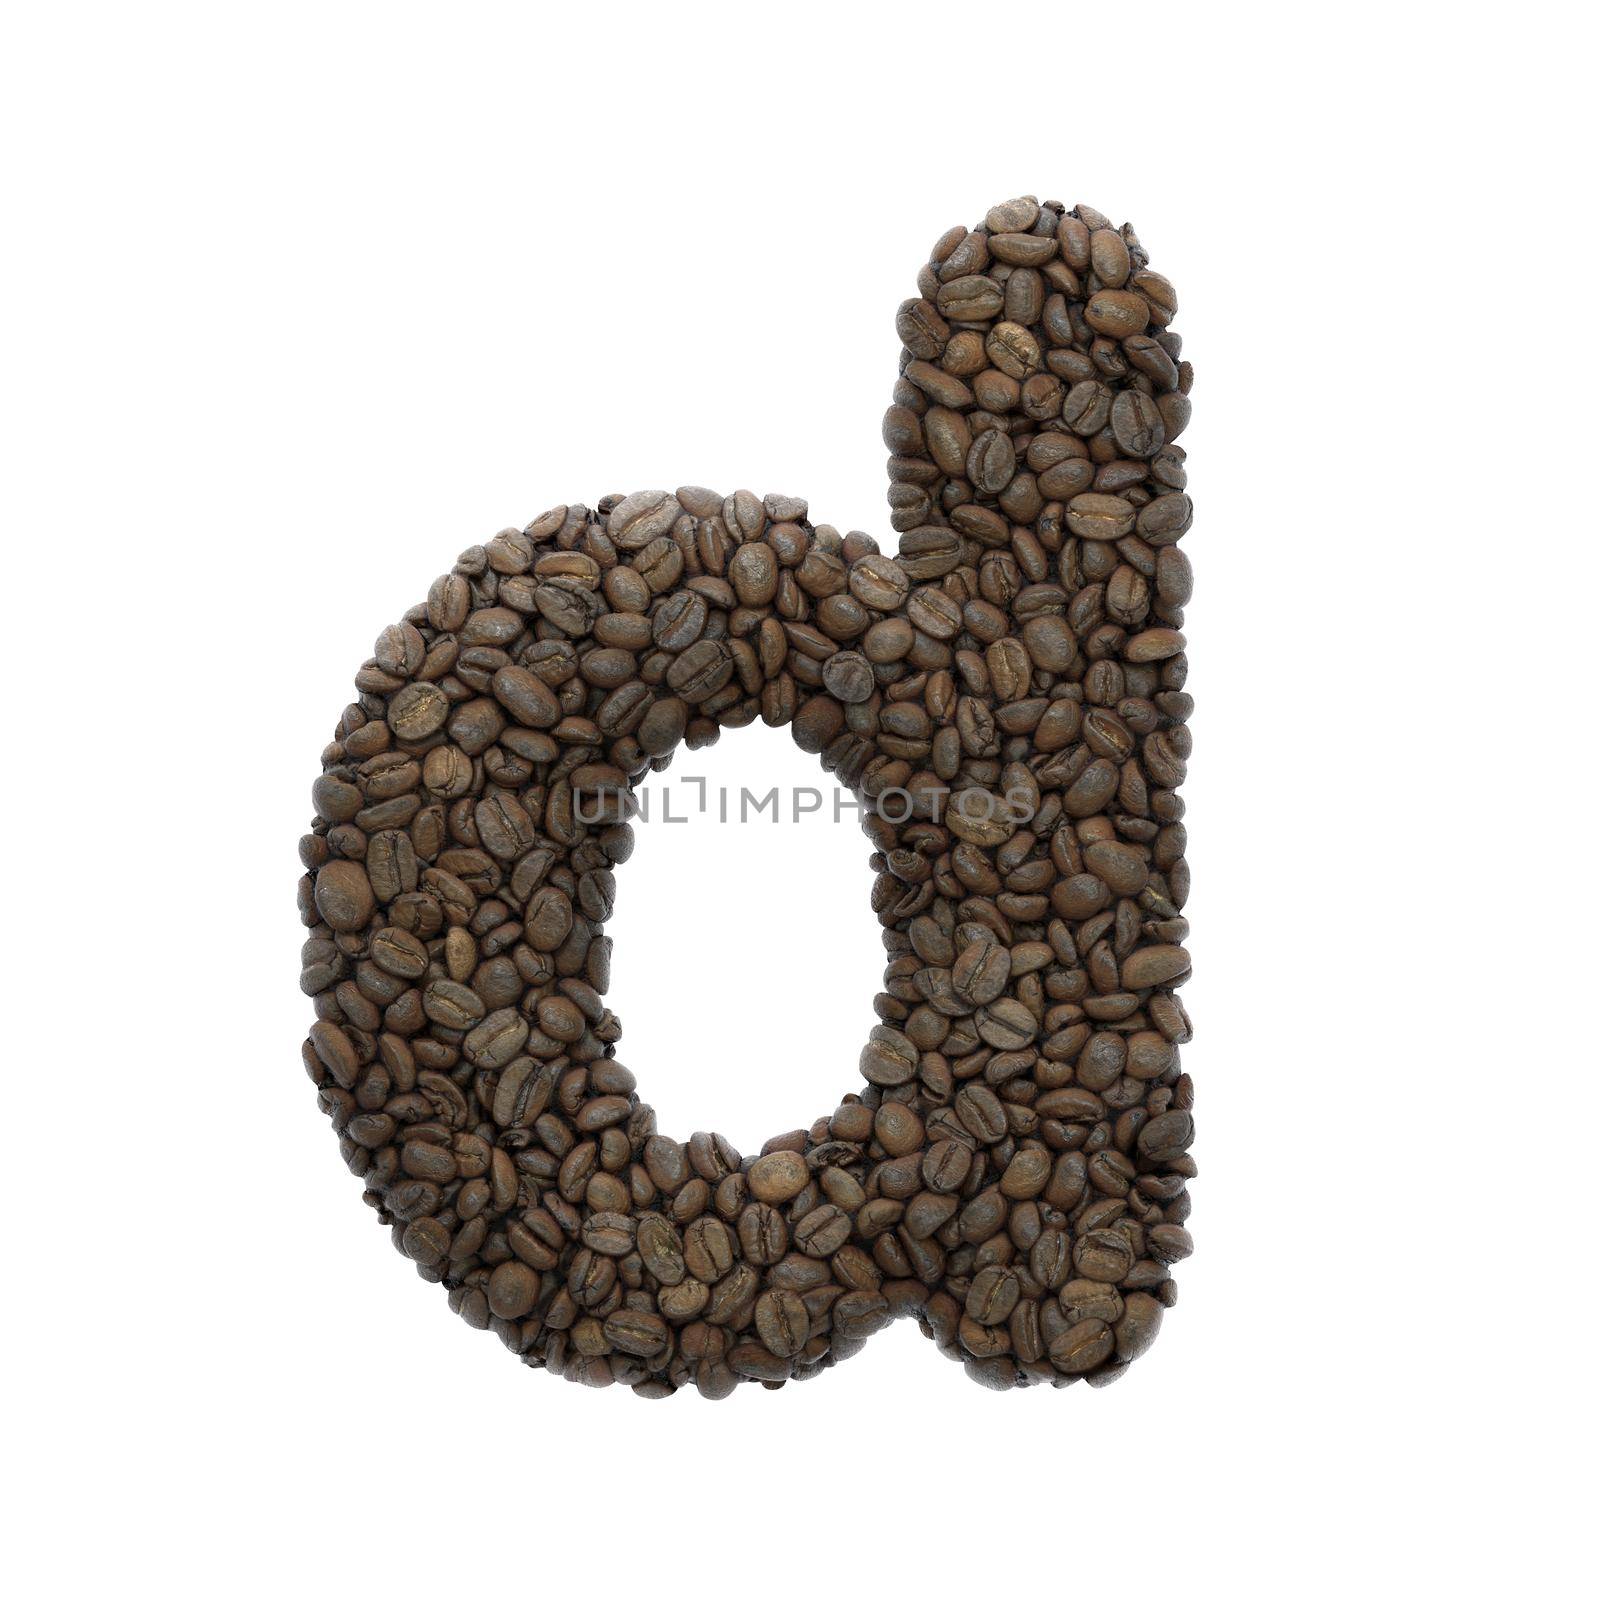 Coffee letter D - Small 3d roasted beans font isolated on white background. This alphabet is perfect for creative illustrations related but not limited to Coffee, energy, insomnia...